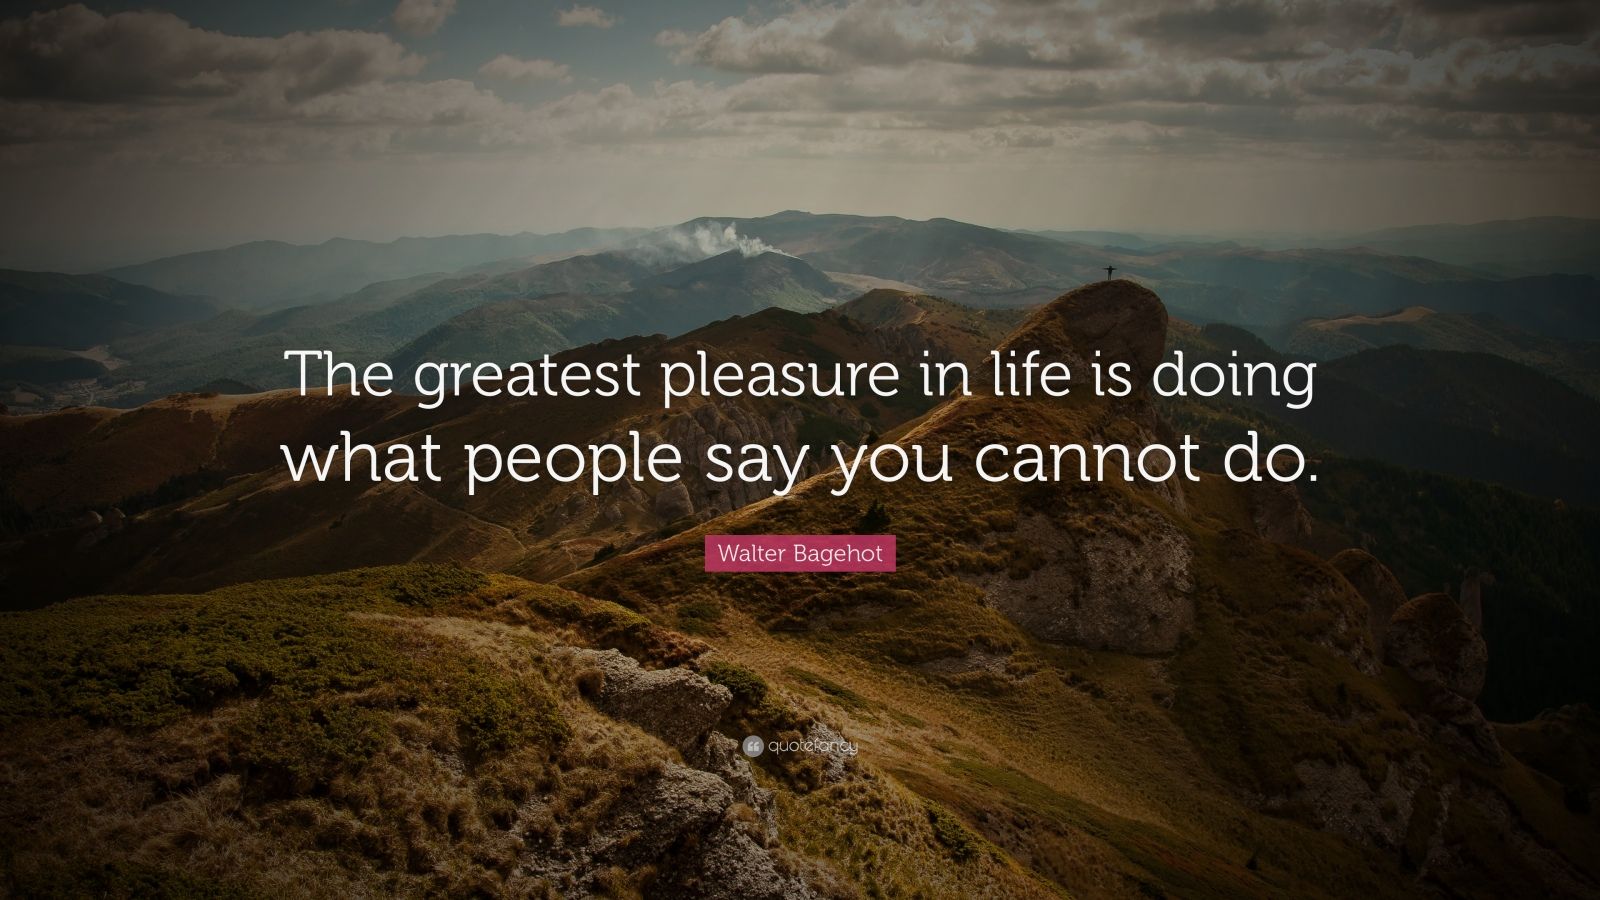 Motivational Quotes “The greatest pleasure in life is doing what people say you cannot